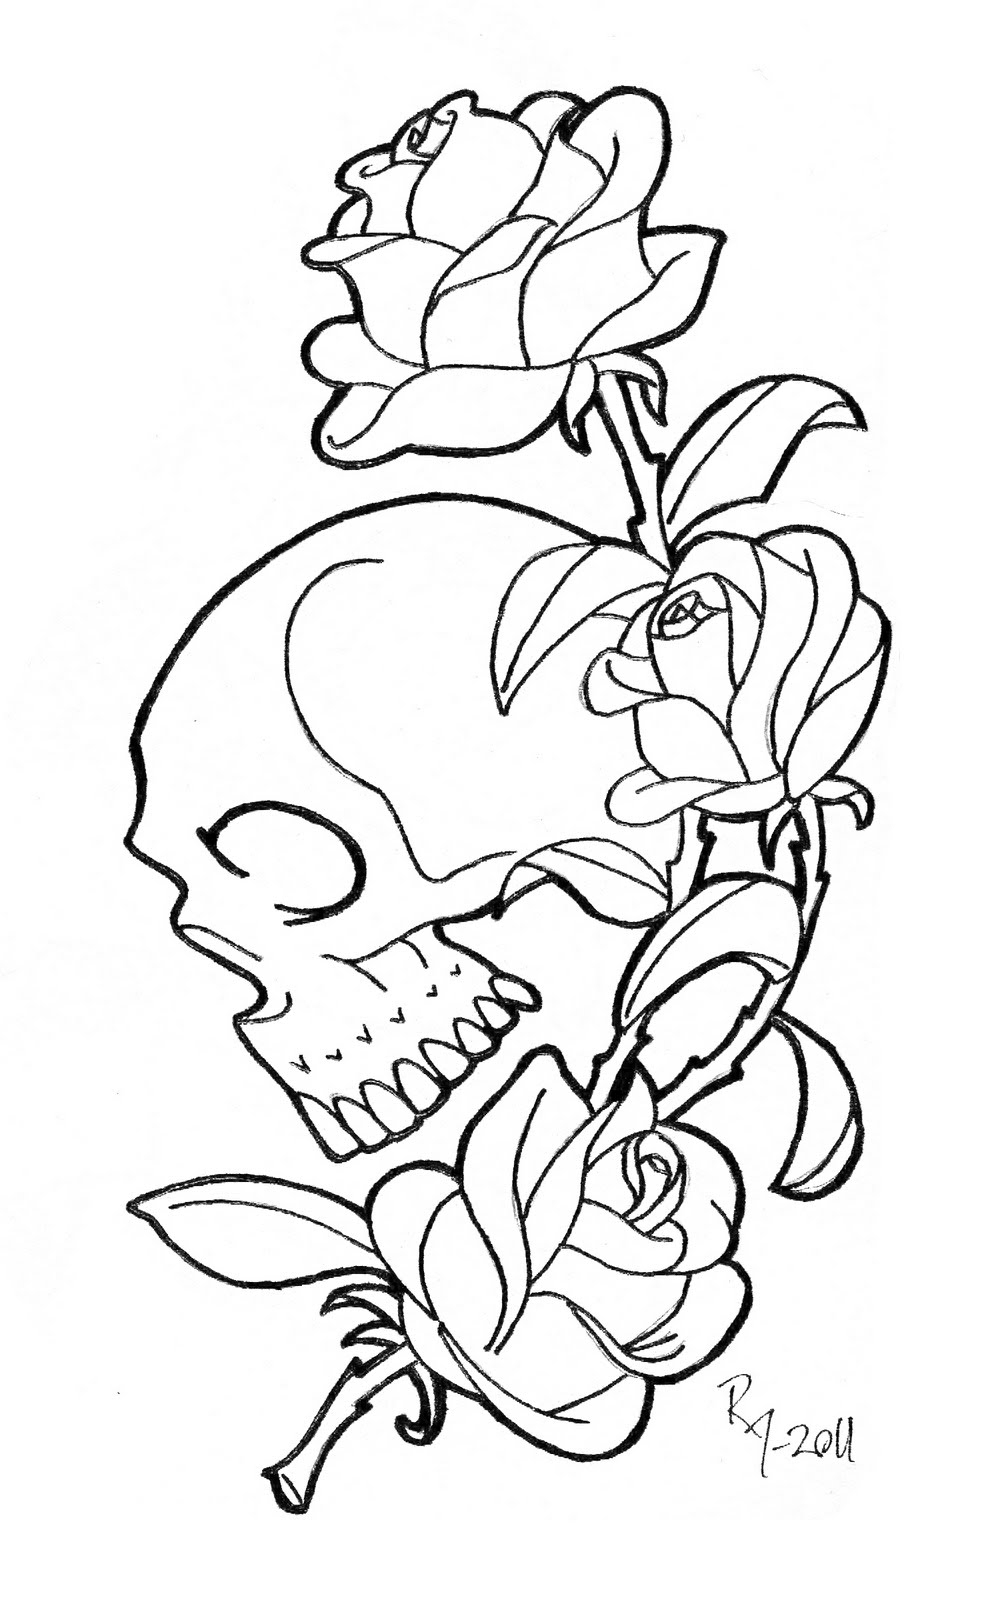 740 Animal Roses And Skulls Coloring Pages with Printable